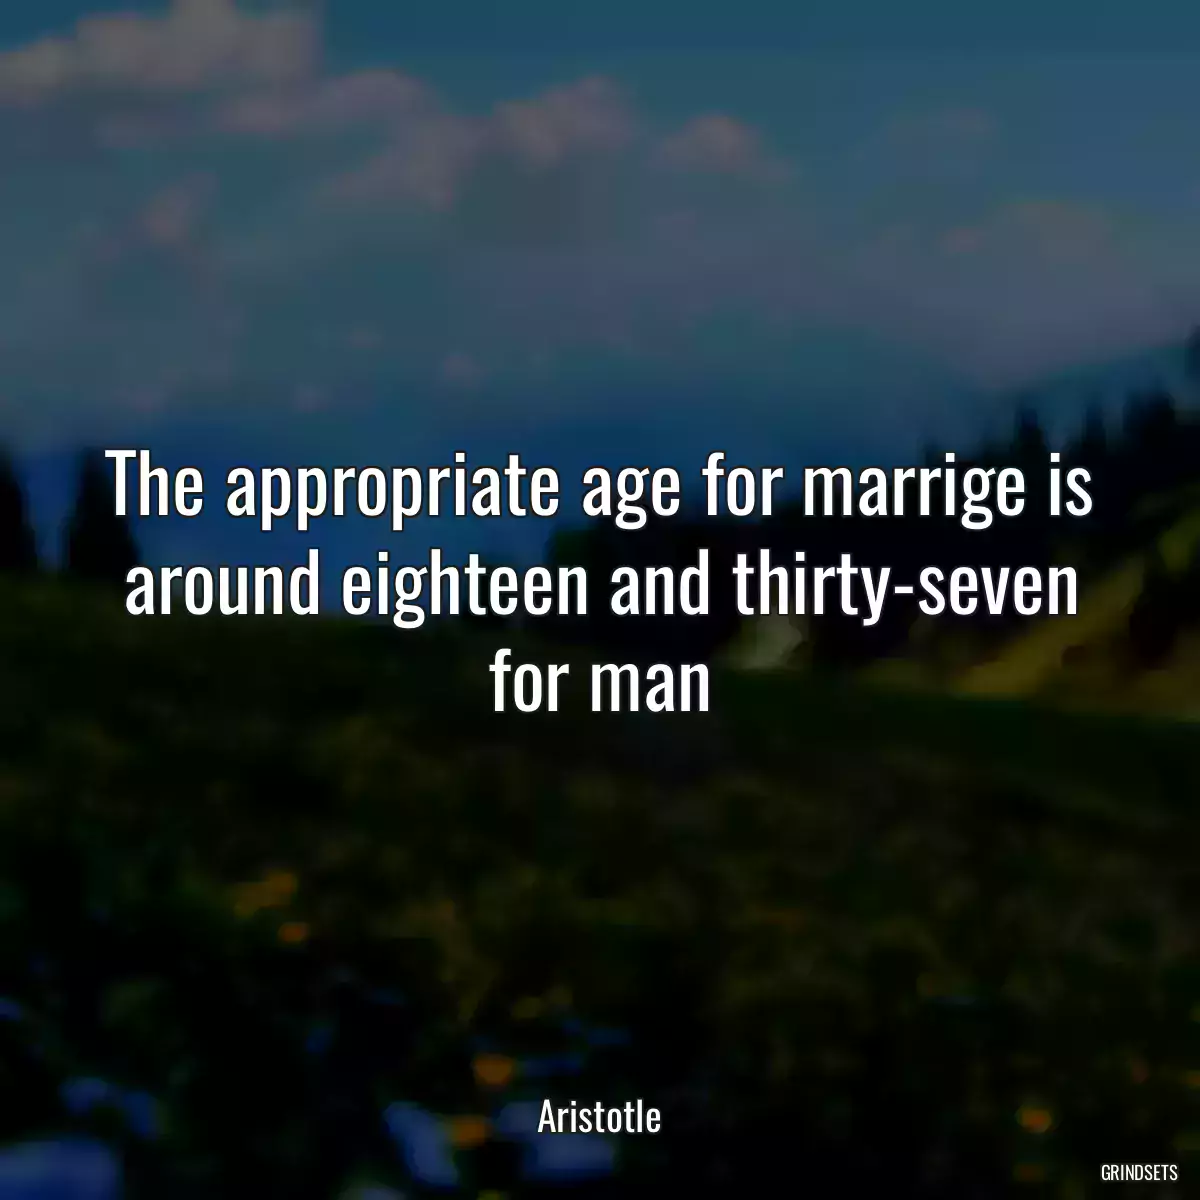 The appropriate age for marrige is around eighteen and thirty-seven for man